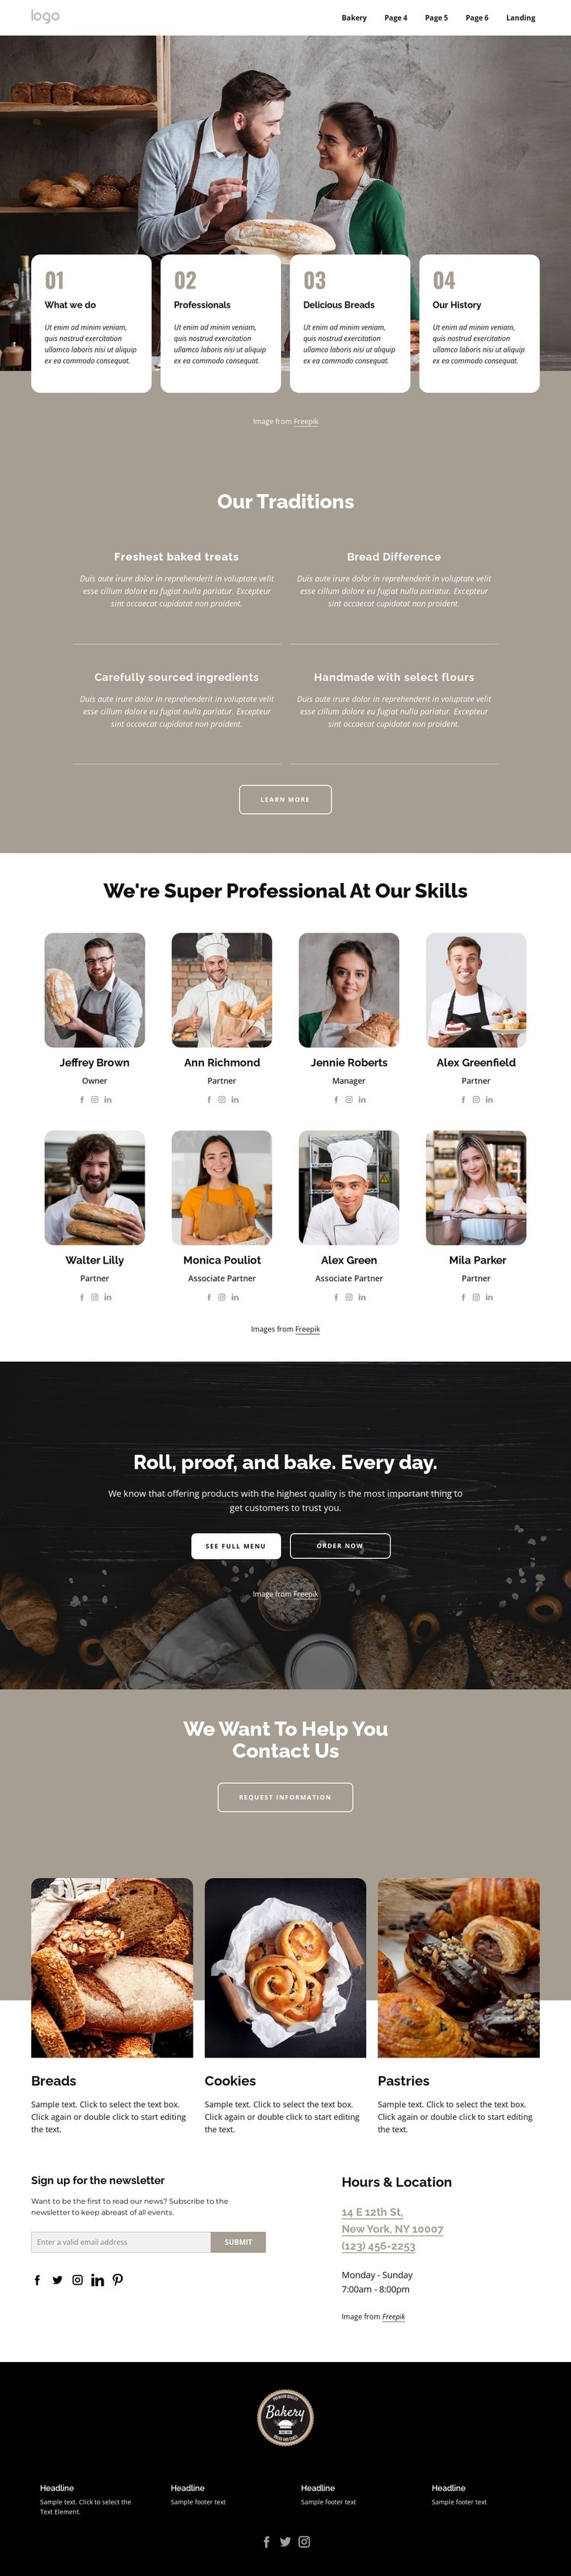 We are professional bakers Homepage Design